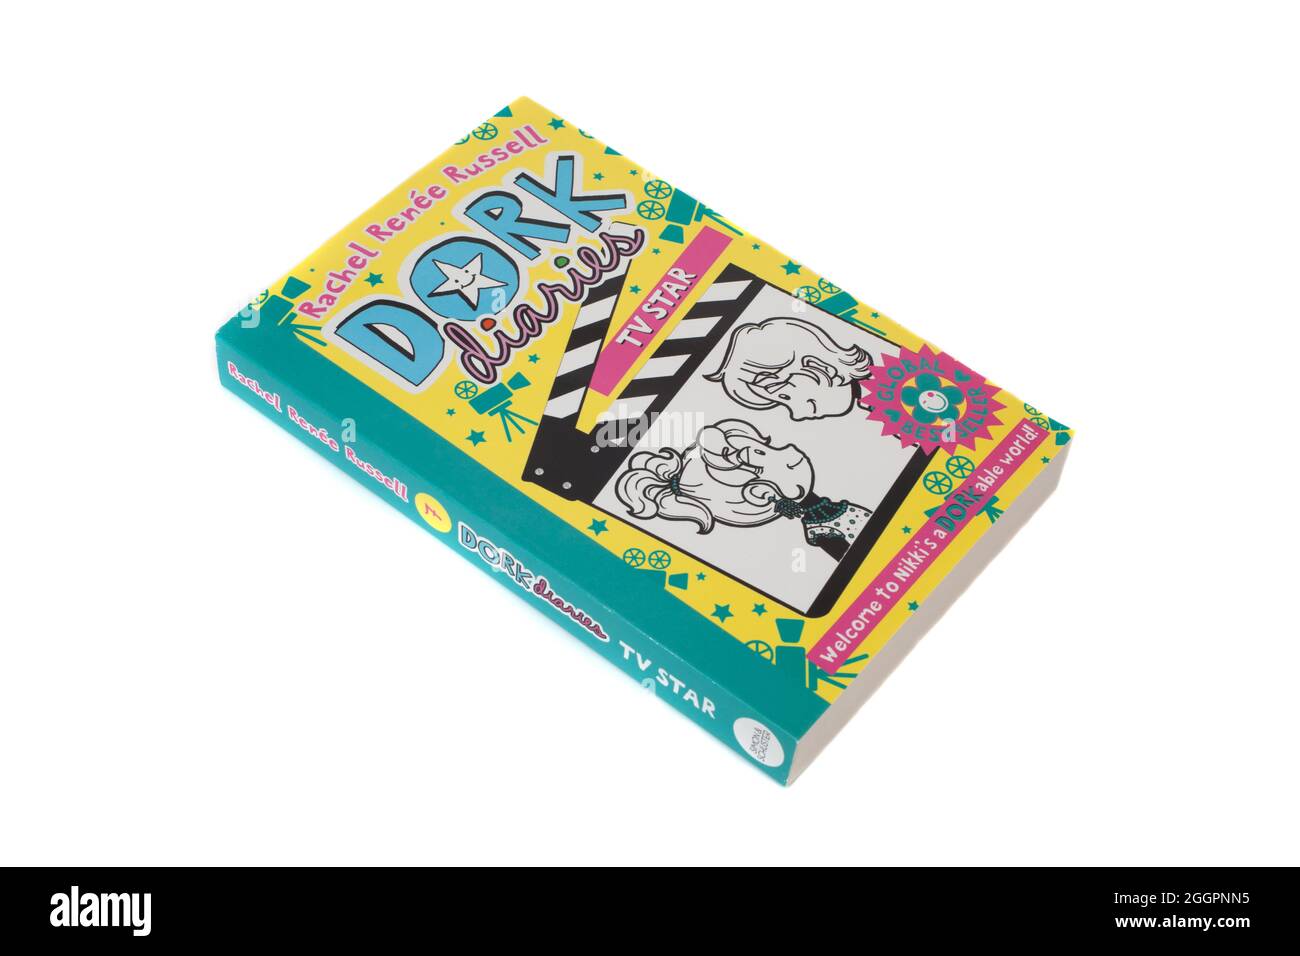 The book, TV Star, The Dork Diaries by Rachel Renee Russell Stock Photo